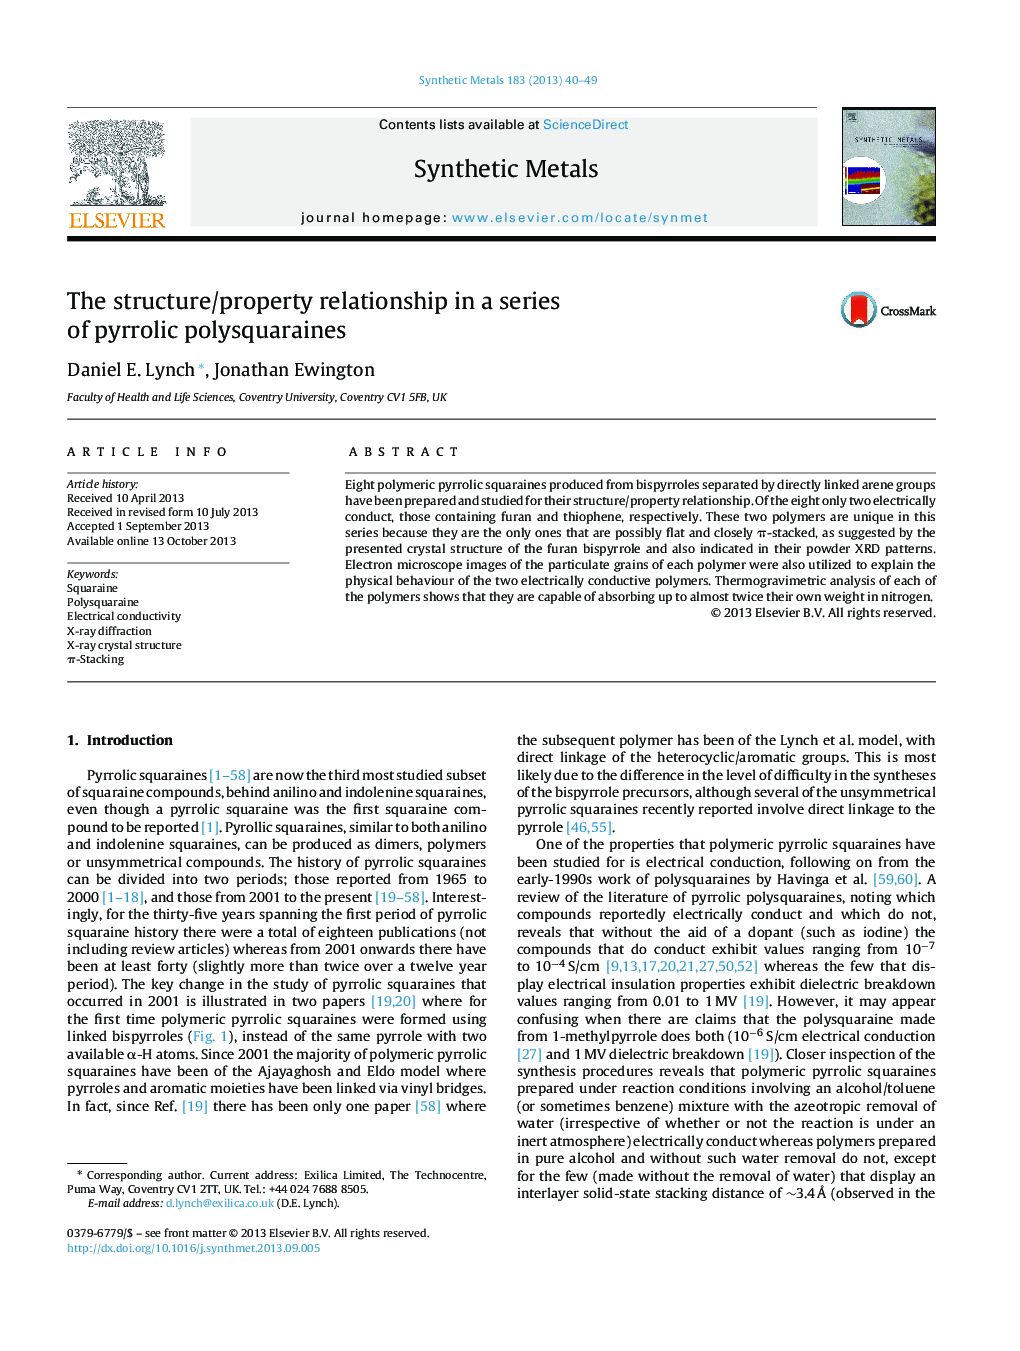 The structure/property relationship in a series of pyrrolic polysquaraines